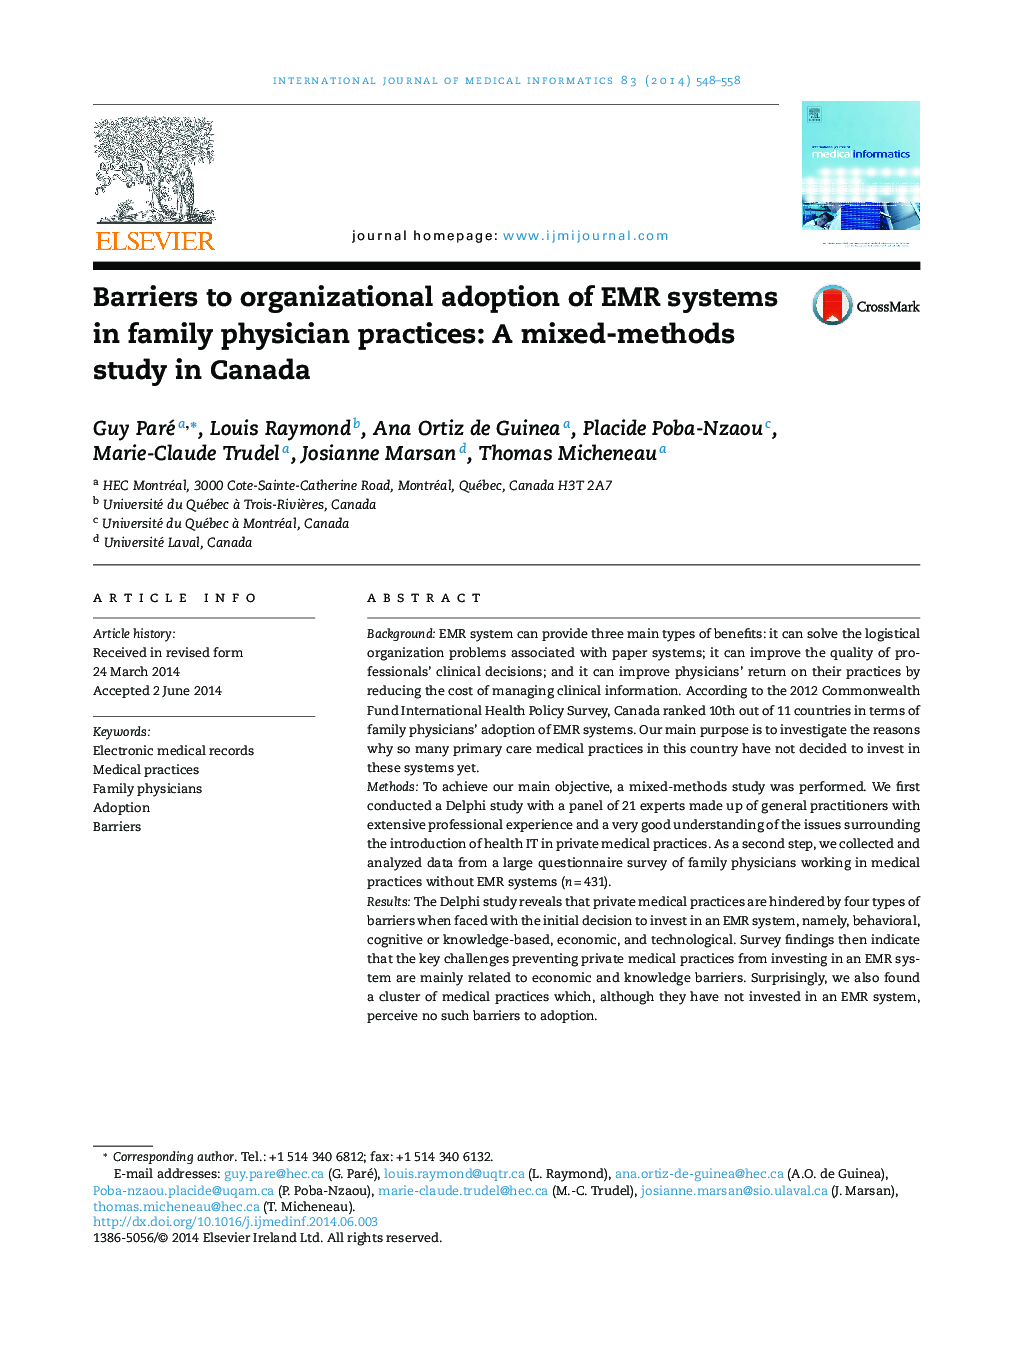 Barriers to organizational adoption of EMR systems in family physician practices: A mixed-methods study in Canada